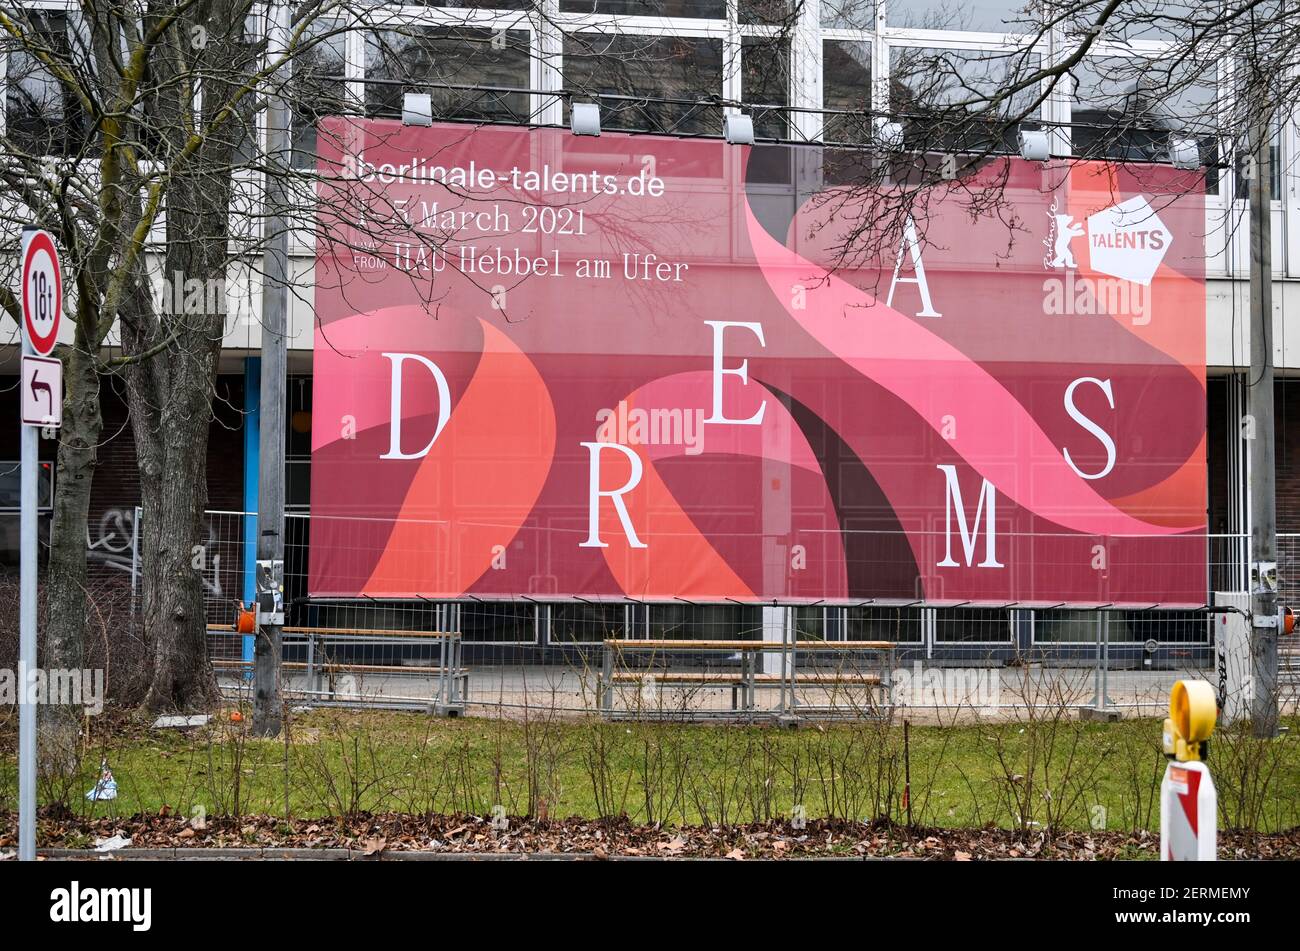 Berlin, Germany. 28th Feb, 2021. A poster with the letters of the word 'Dreams' of the Berlinale Talents can be seen at HAU2 Theater HAU - Hebbel am Ufer. It is an initiative of the Berlin International Film Festival (Berlinale) with the aim of networking selected talents from all over the world and bringing them together with renowned experts from the film industry. This year, Berlinale Talents is an online event for up-and-coming filmmakers. Credit: Jens Kalaene/dpa-Zentralbild/ZB/dpa/Alamy Live News Stock Photo